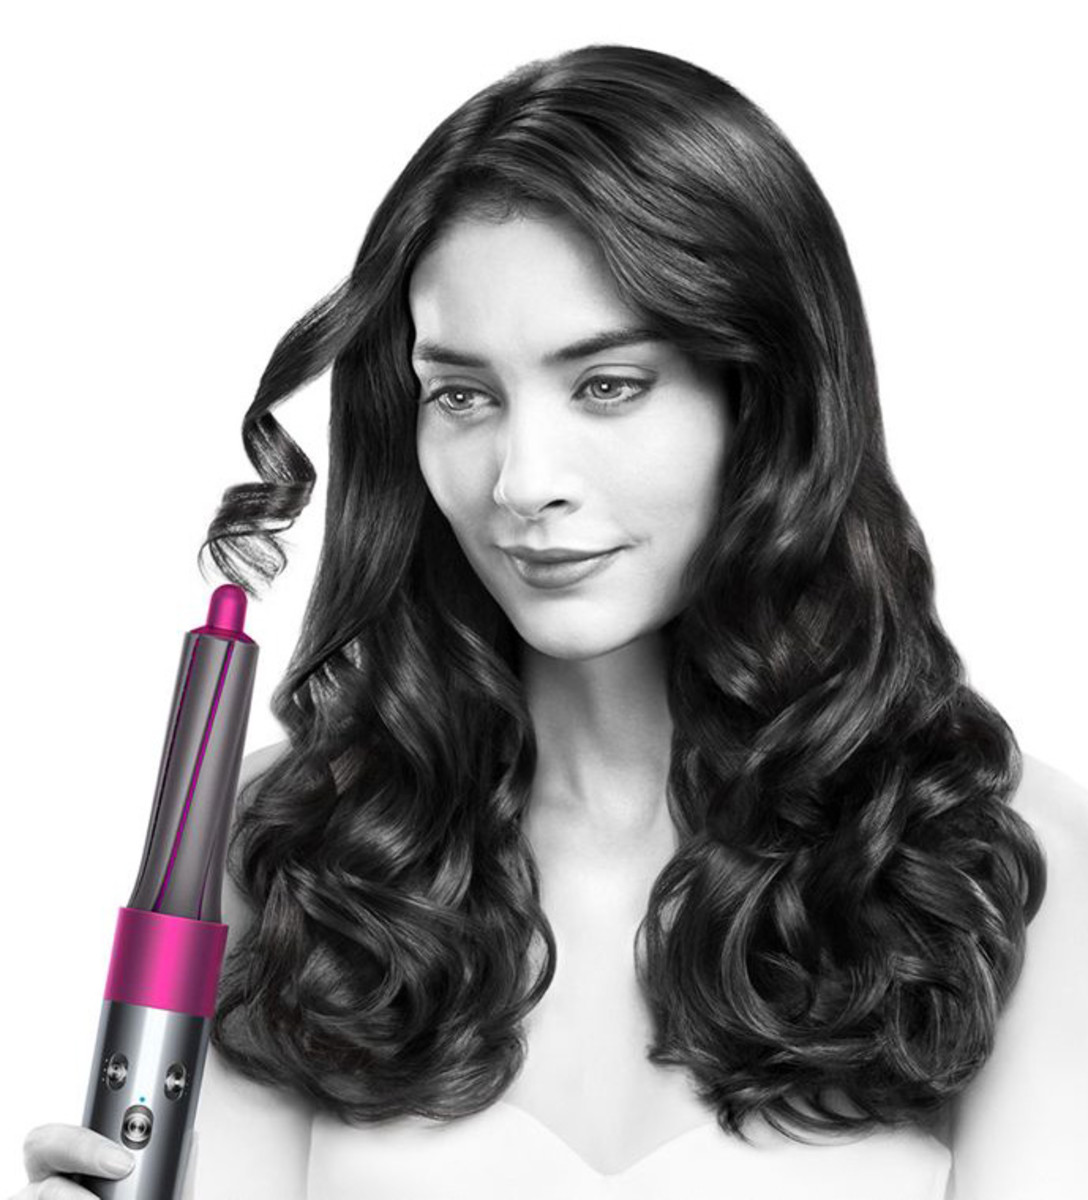 DYSON AIRWRAP STYLER FOR WAVES, CURLS, VOLUME, SMOOTH FINISH - Beautygeeks